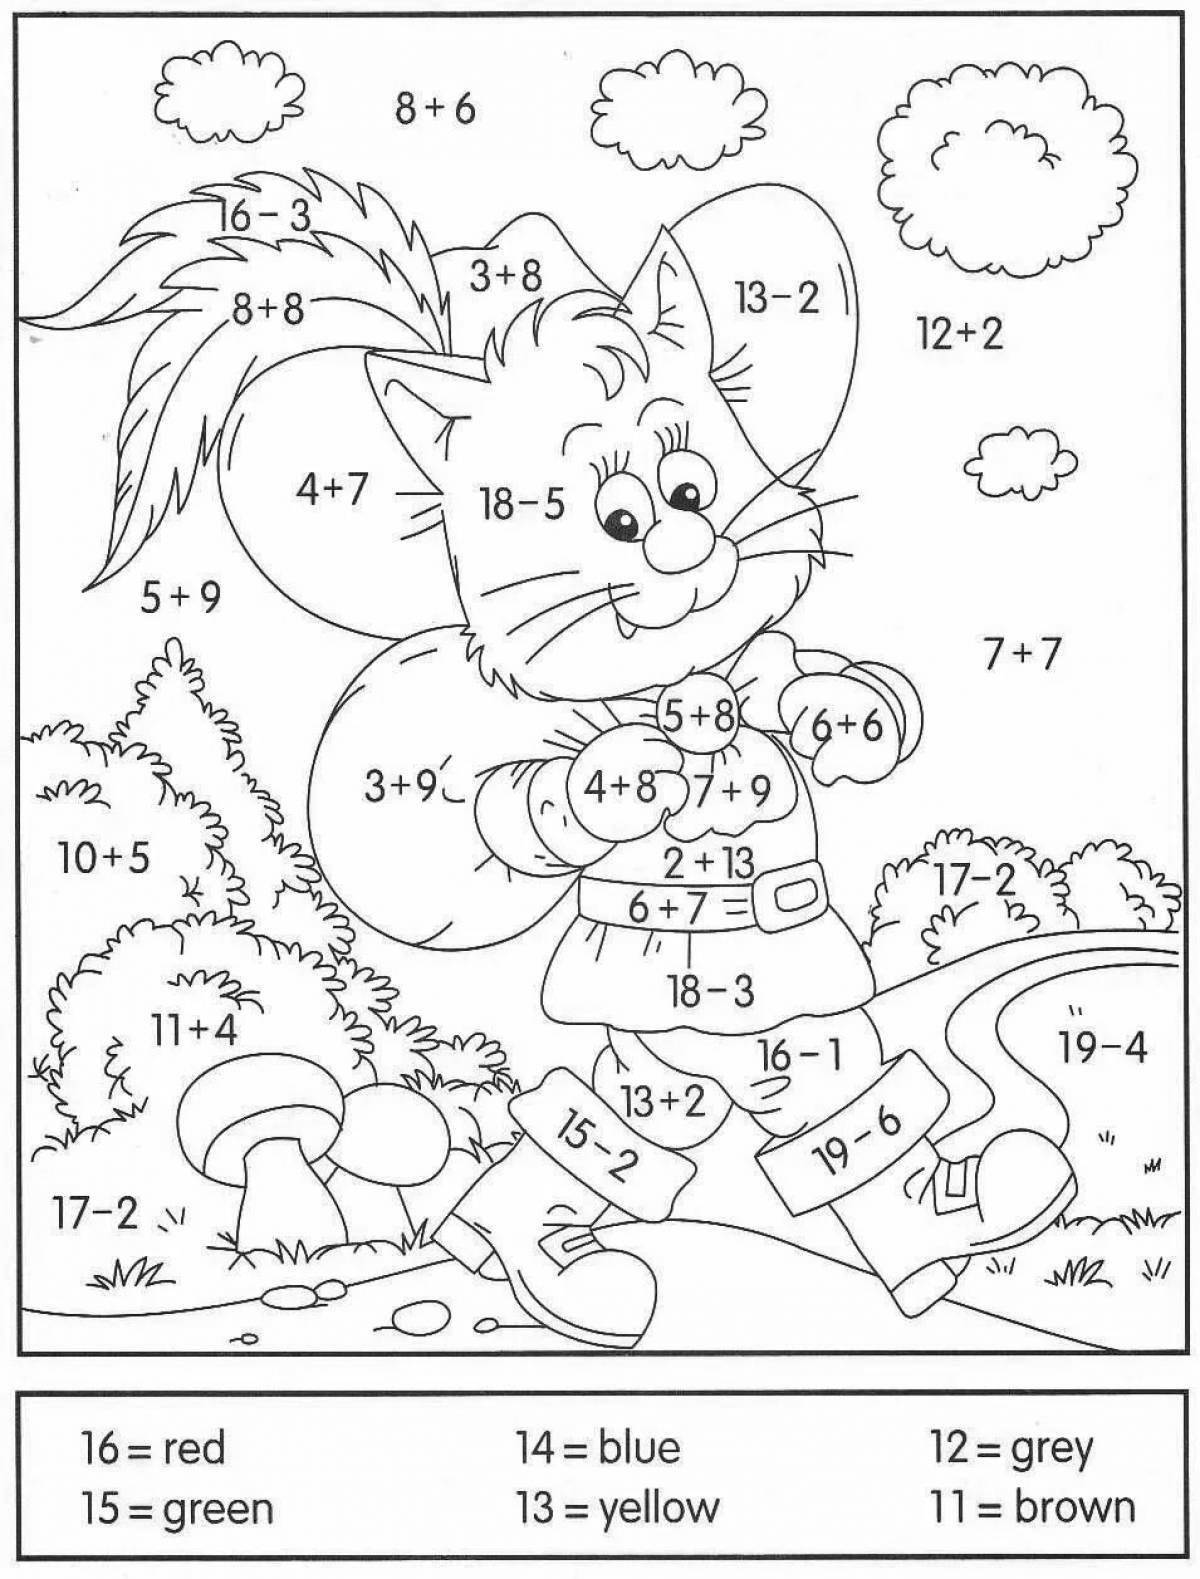 Bright examples of coloring pages for 2nd grade in mathematics